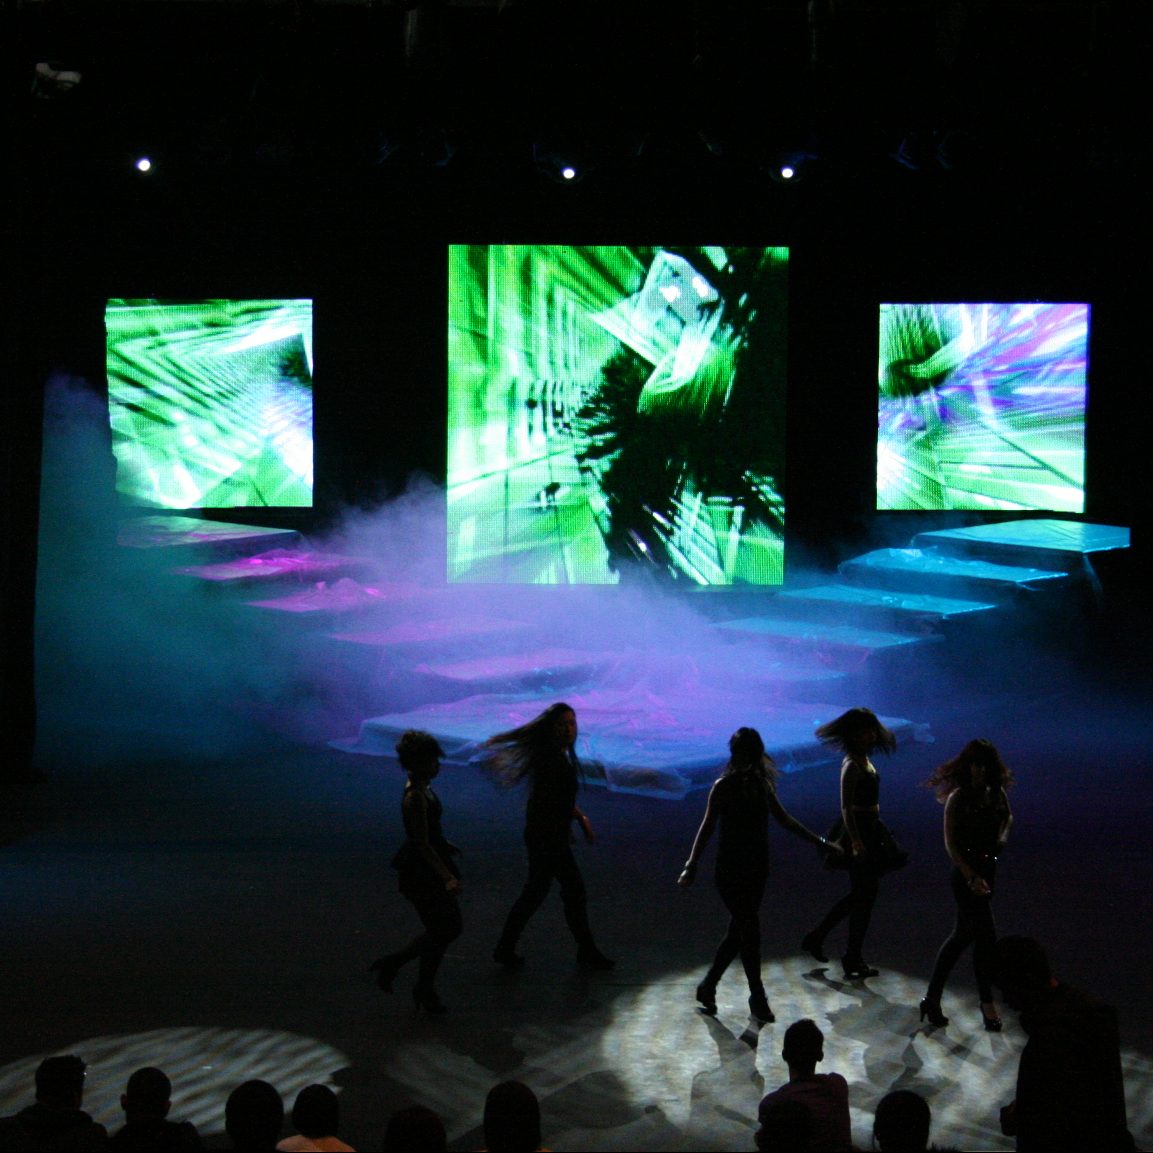 Image shows large screens illuminating a stage for a production